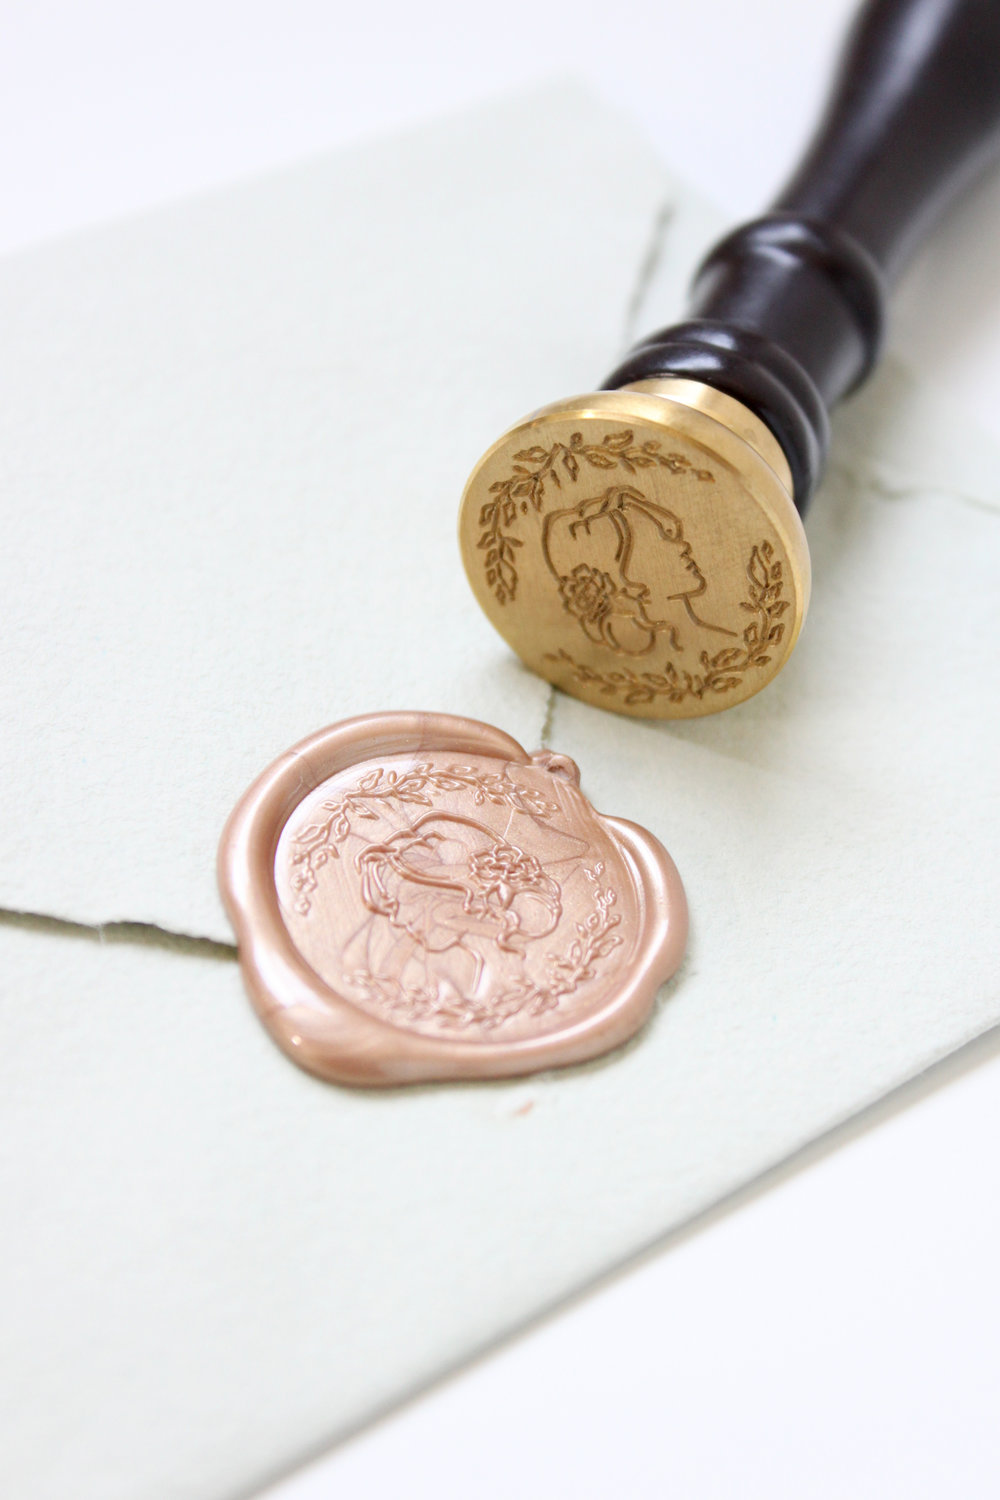 How To Make A Wax Seal Diy Tutorial